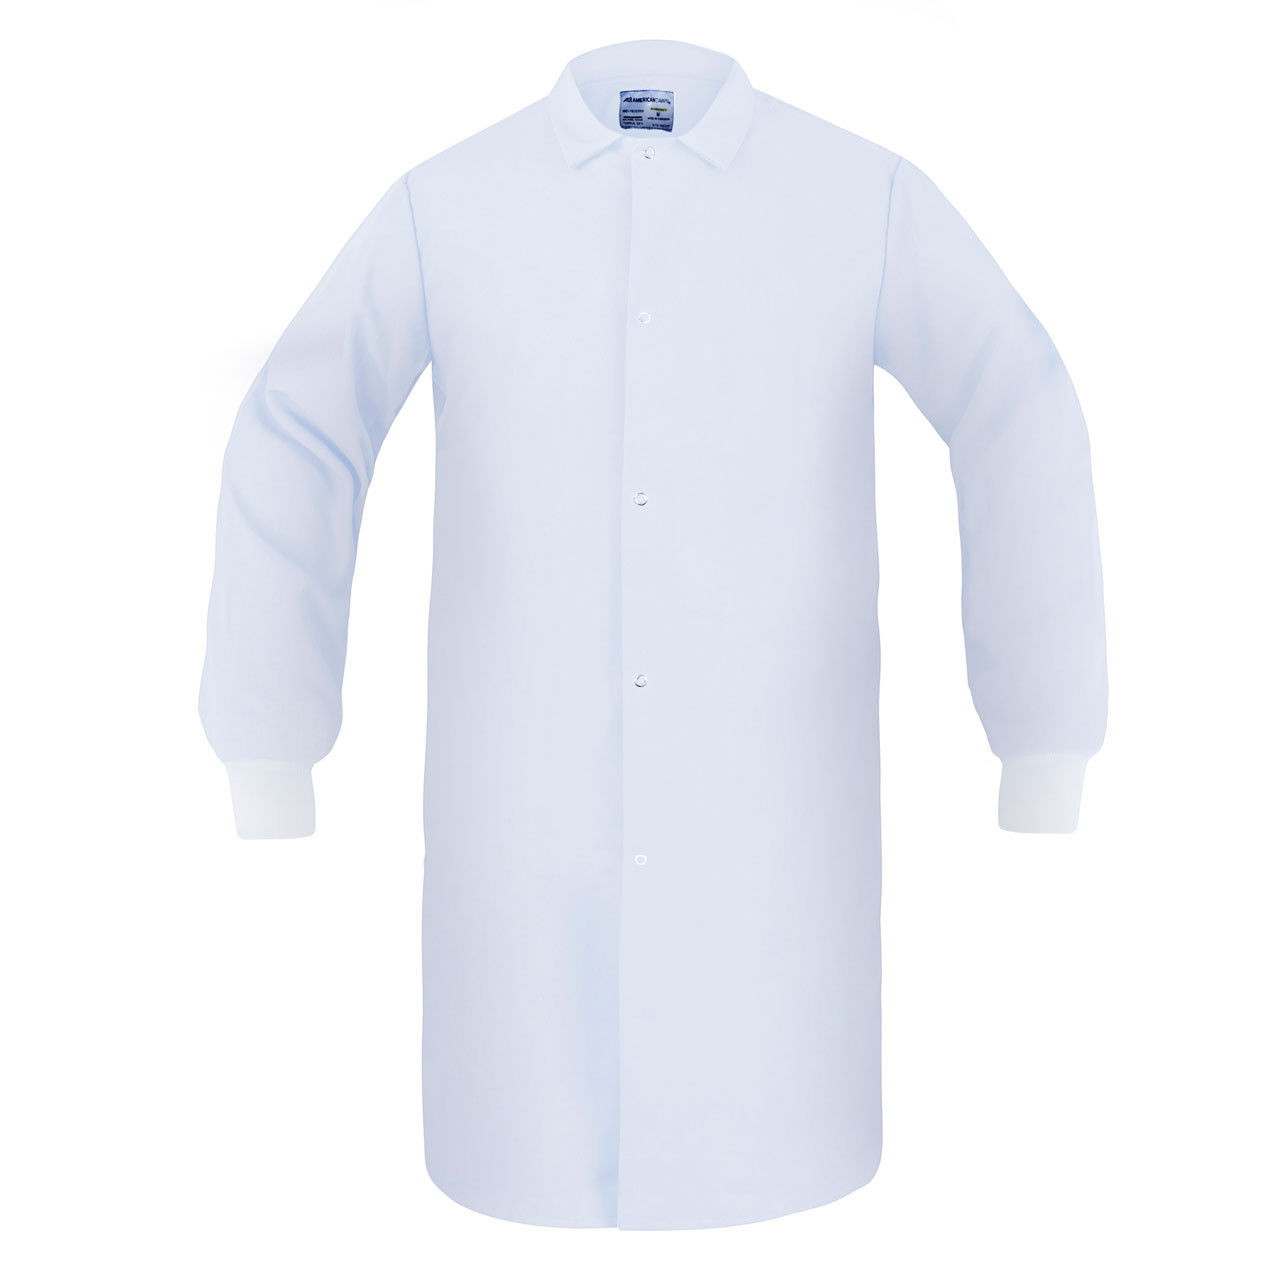 What is the method to select the correct size for the HACCP Frock in ADI HACCP uniforms?